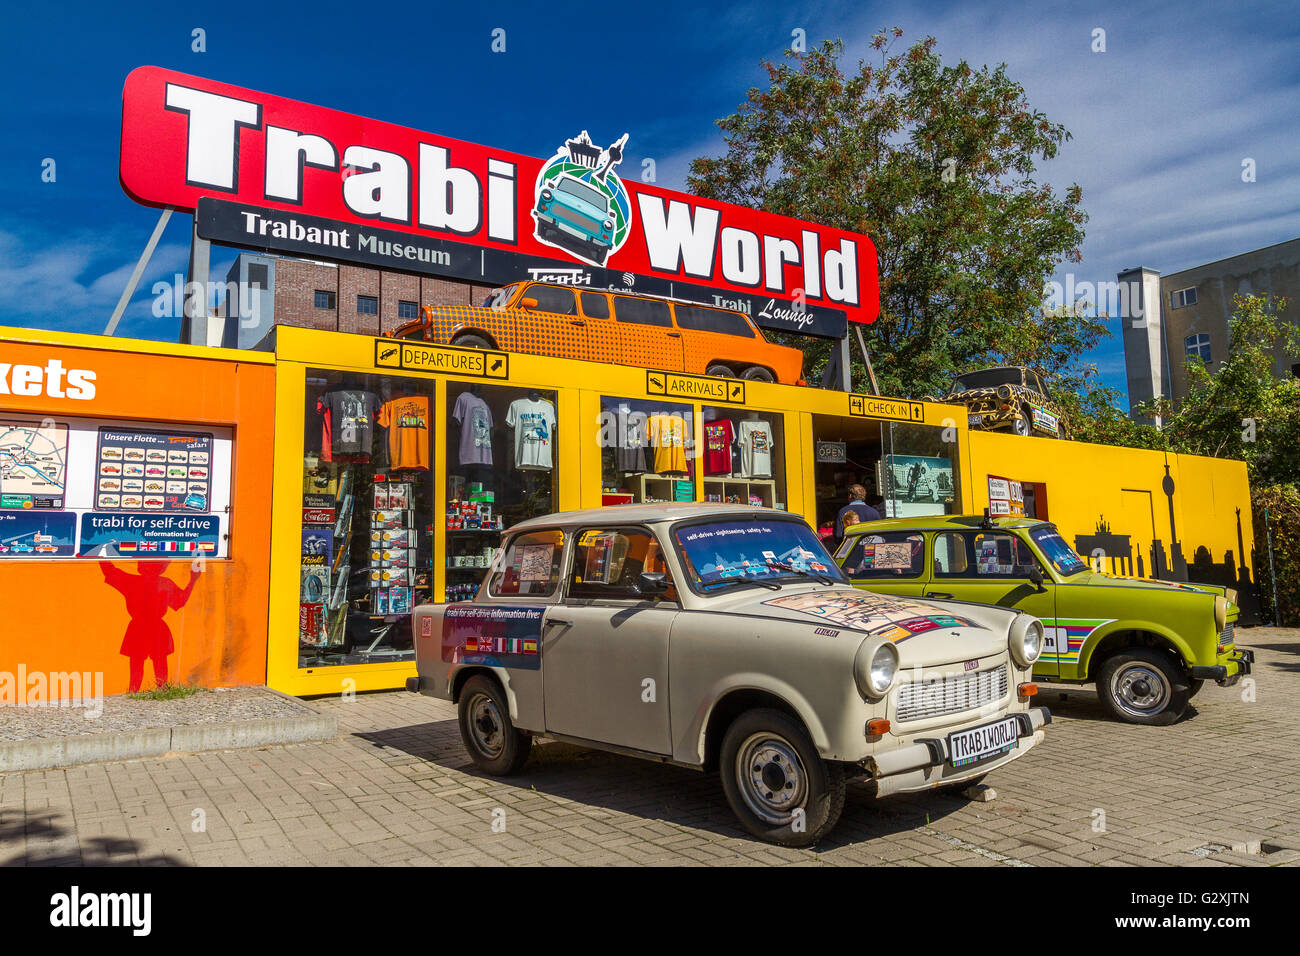 Trabant cars at Trabi World in Berlin a collection of old Trabant cars for hire, Berlin, Germany Stock Photo